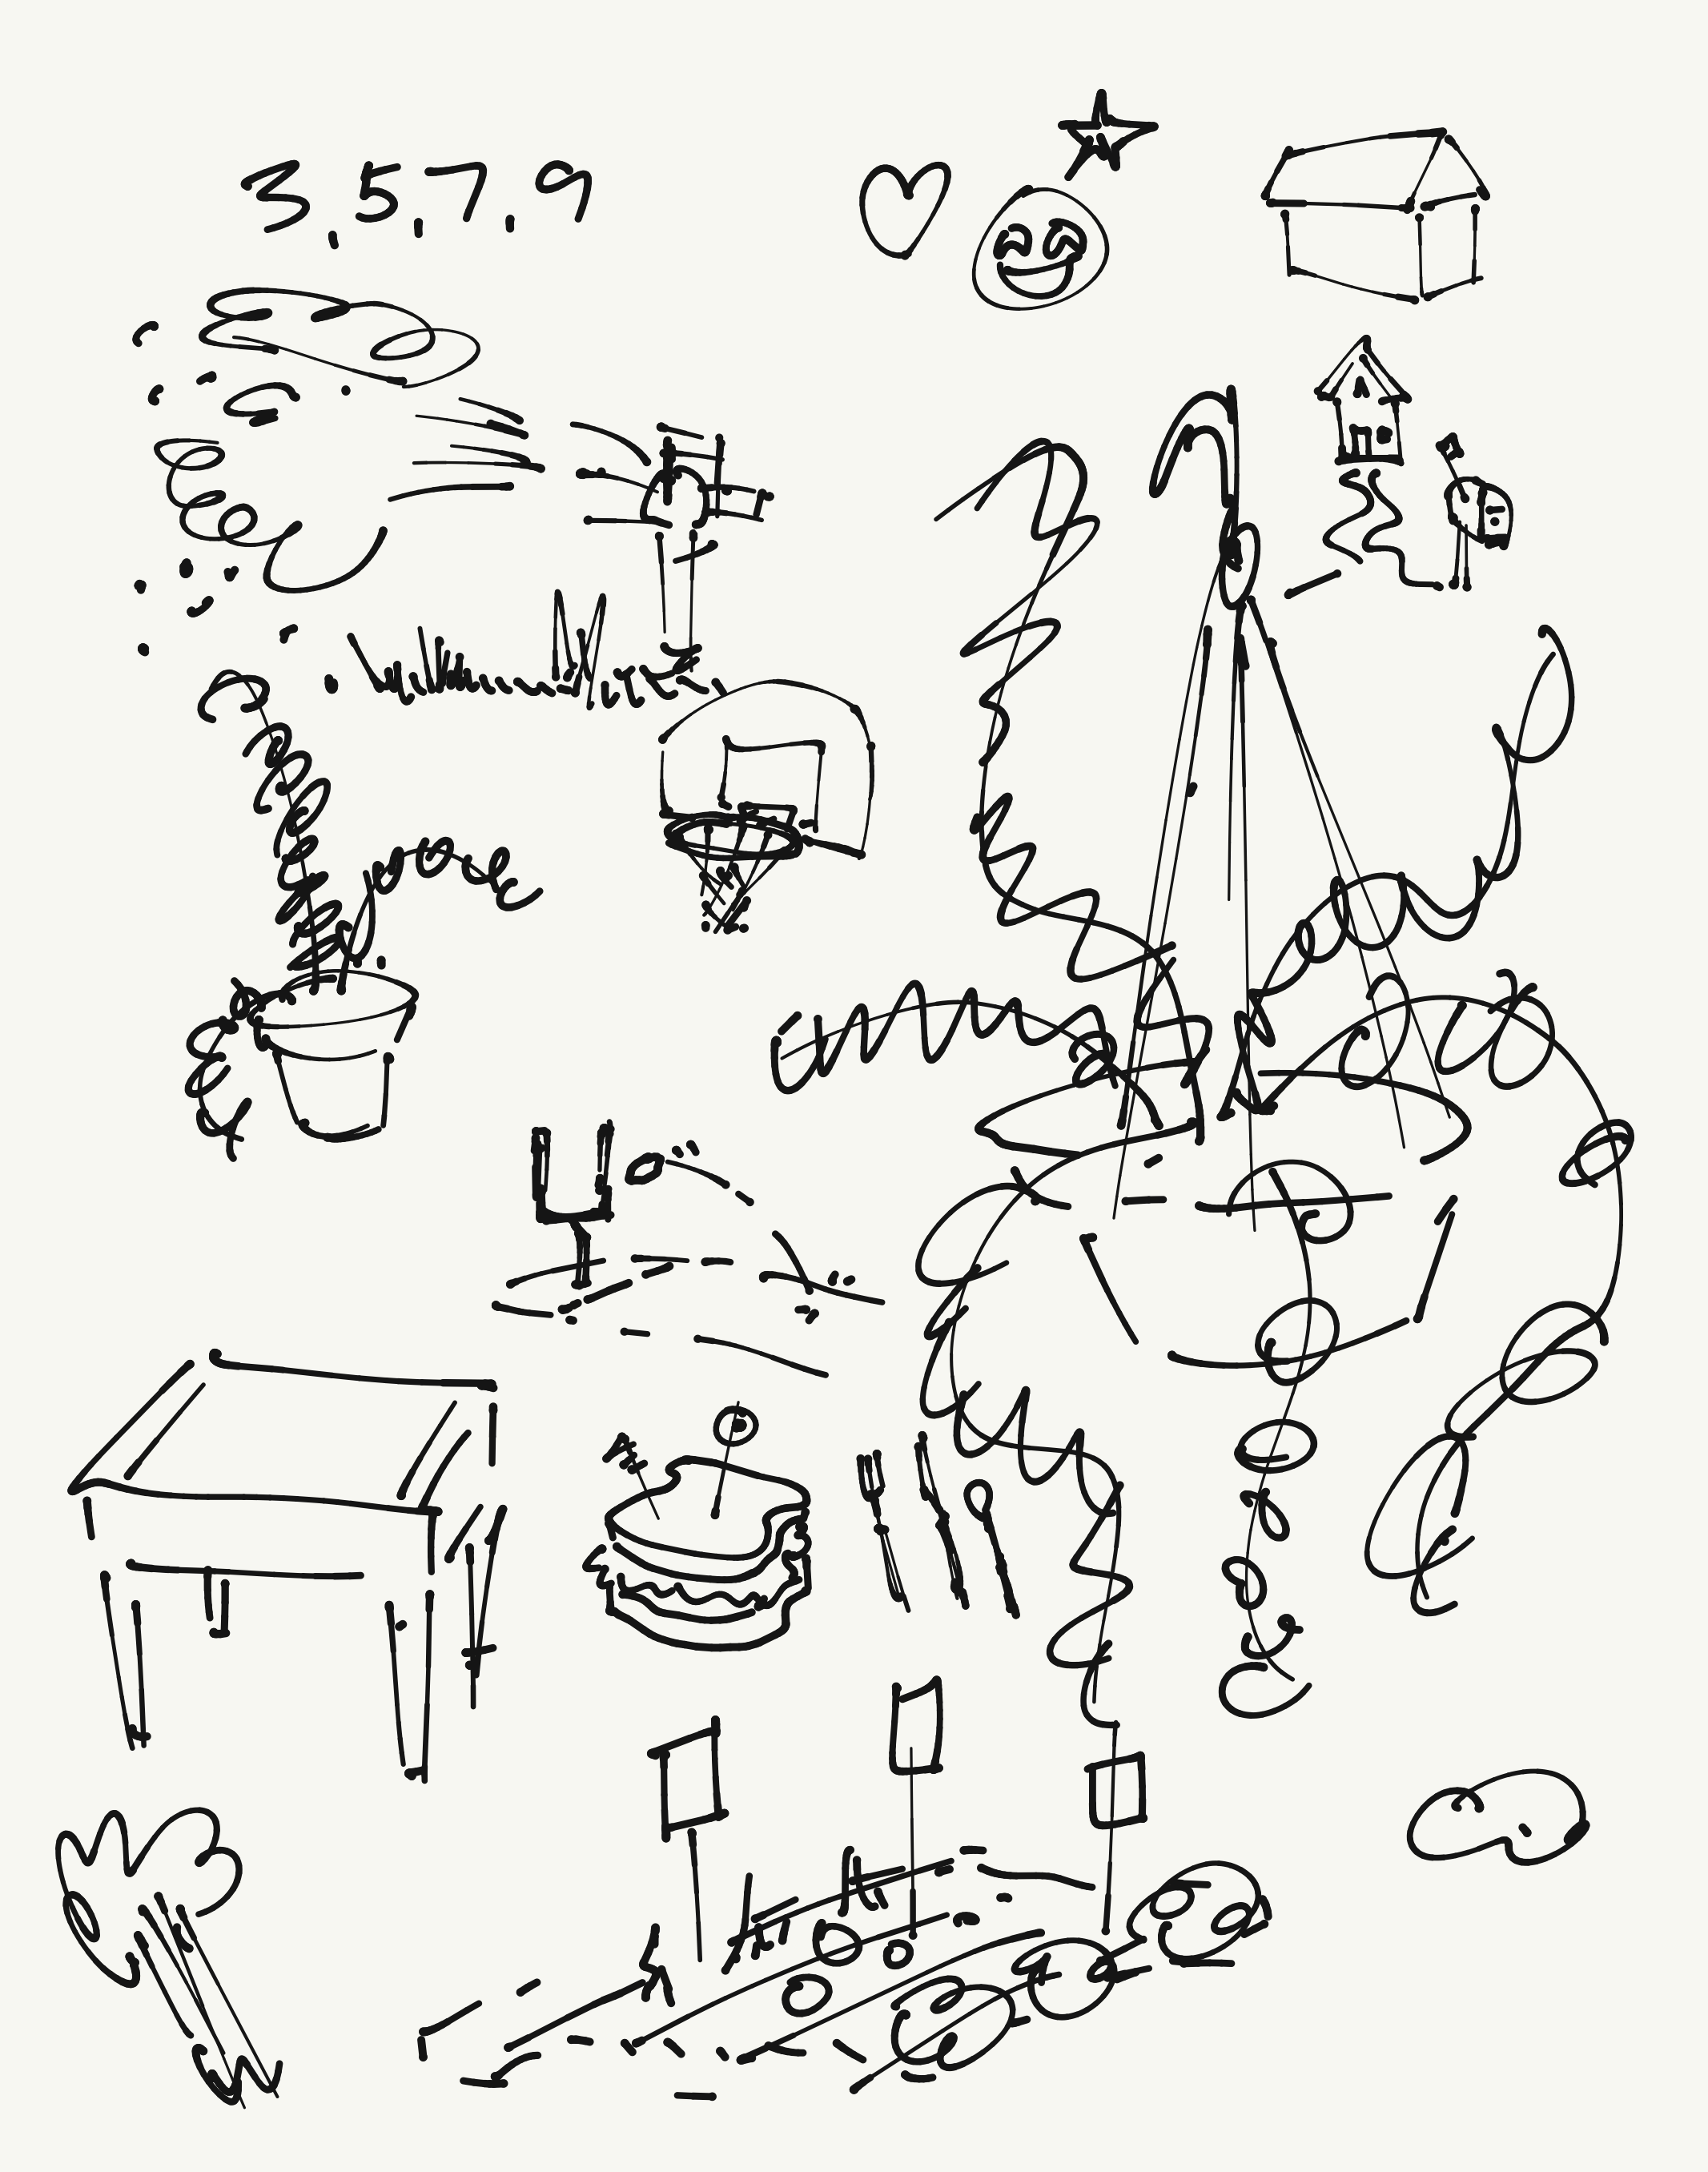 Doodle Catalog 3 - lots of sketches drawings quick visual storytelling note taking examples and ideas 8.png